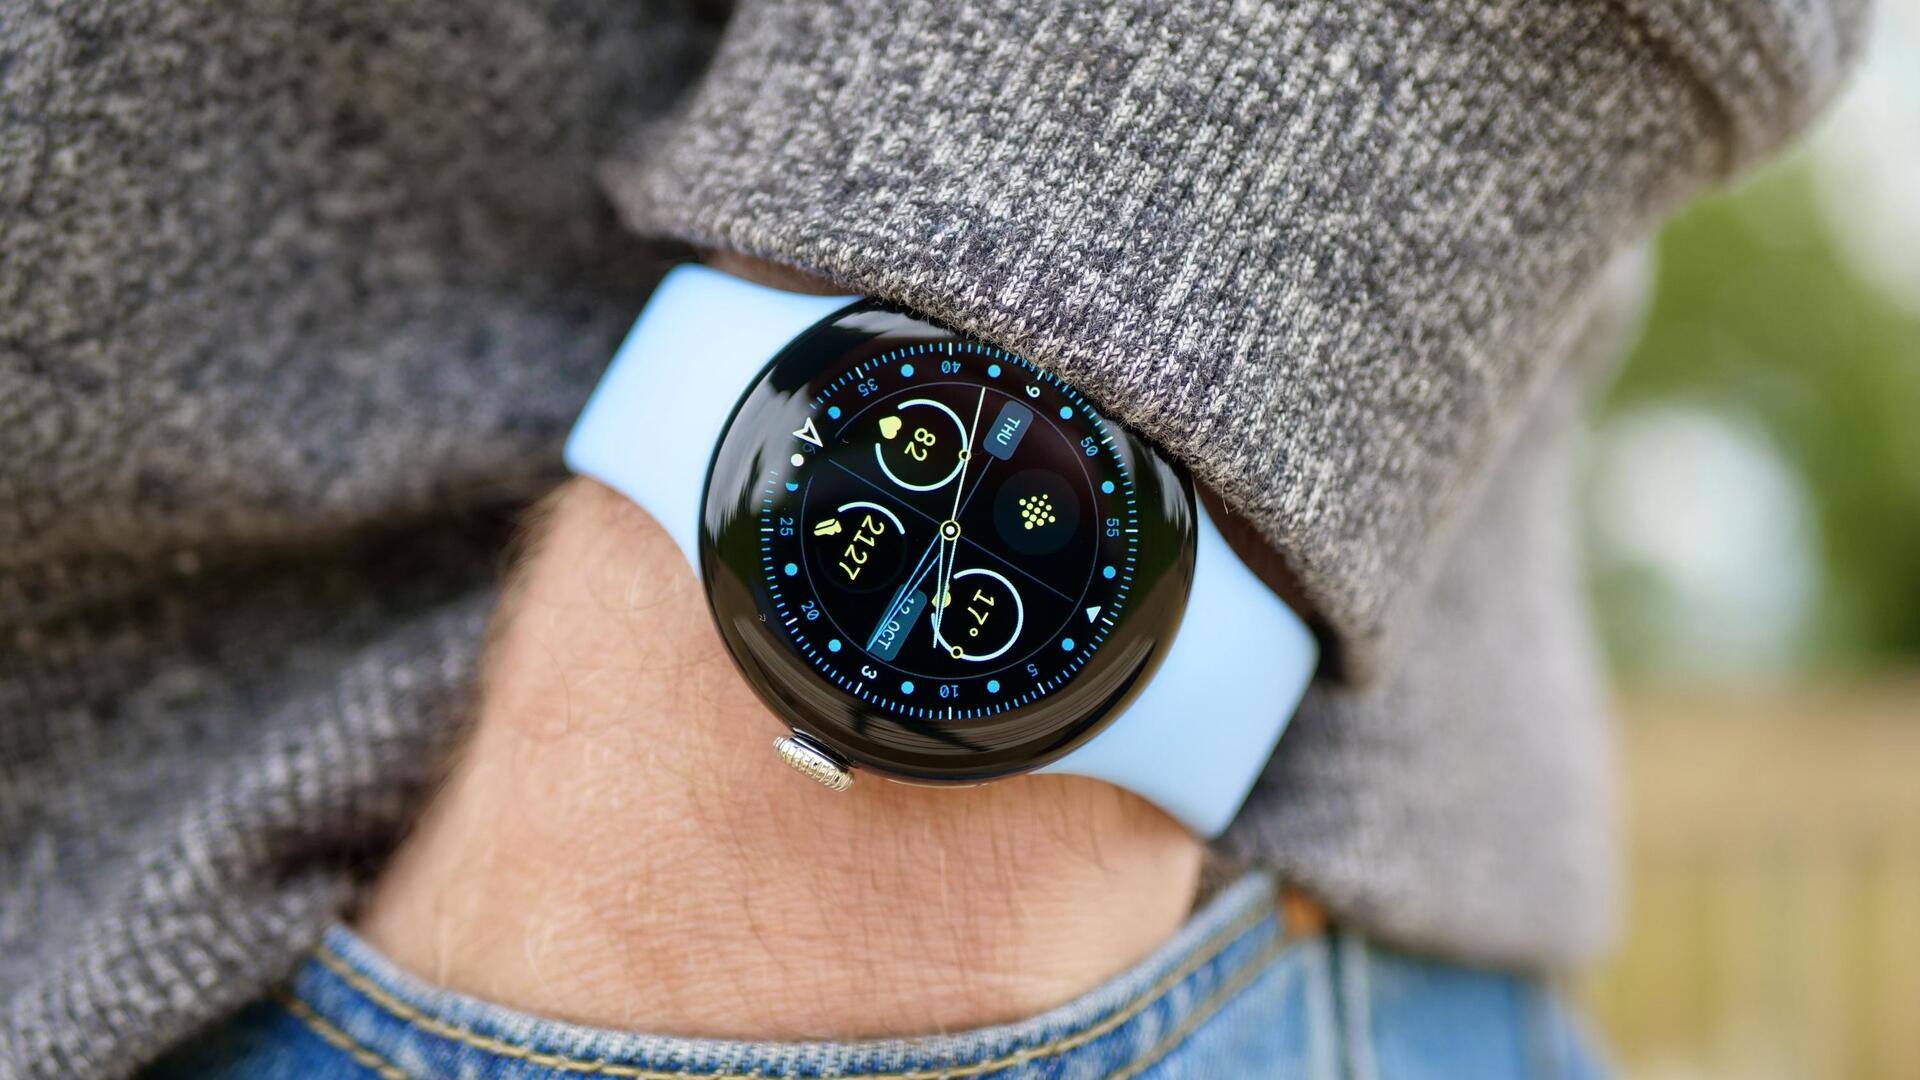 Google's Pixel Watch 2 may soon offer vibration-based time telling